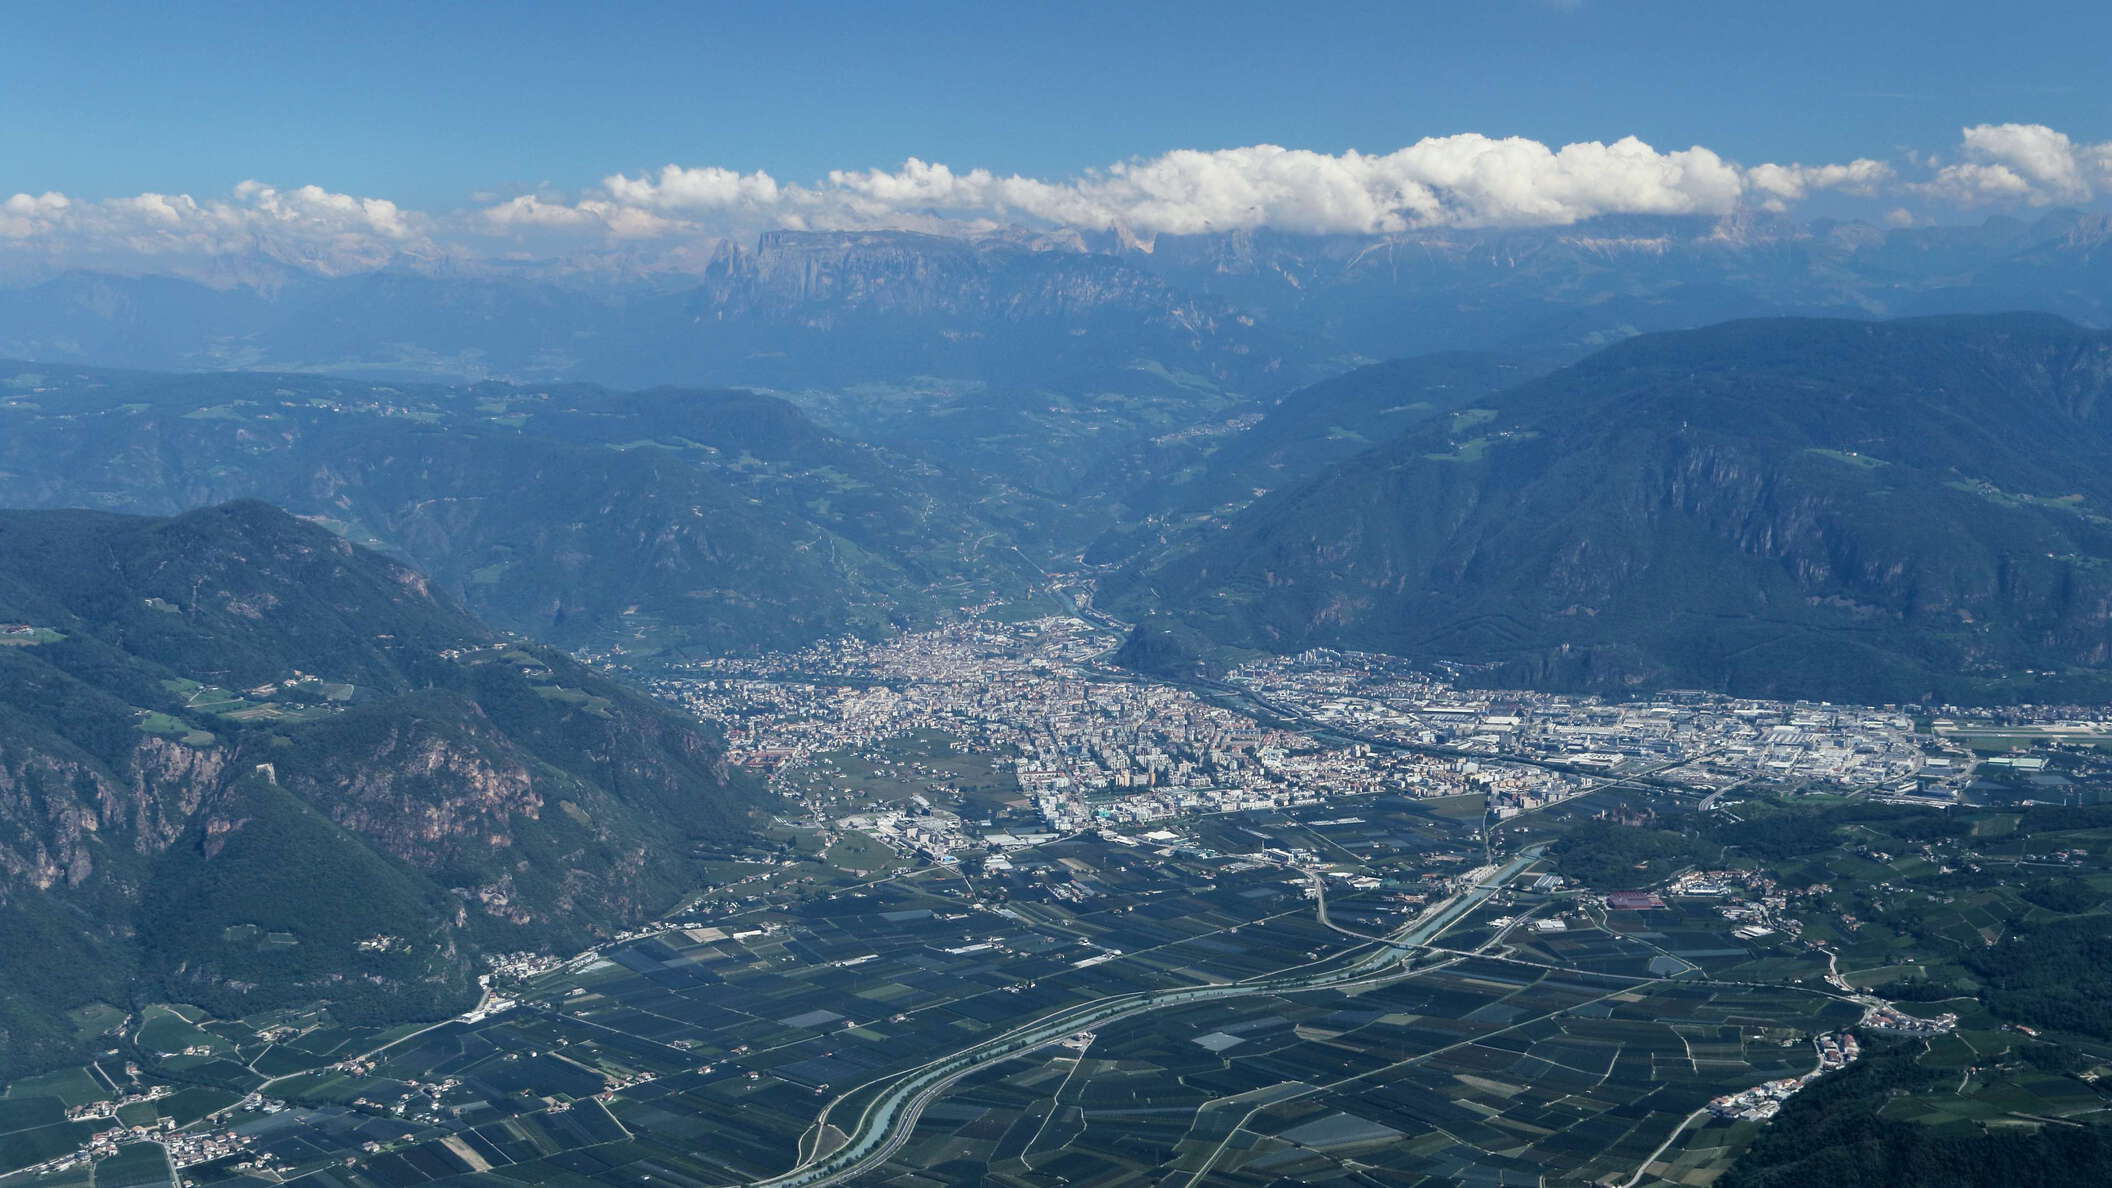 Bozen with Etschtal and Dolomites